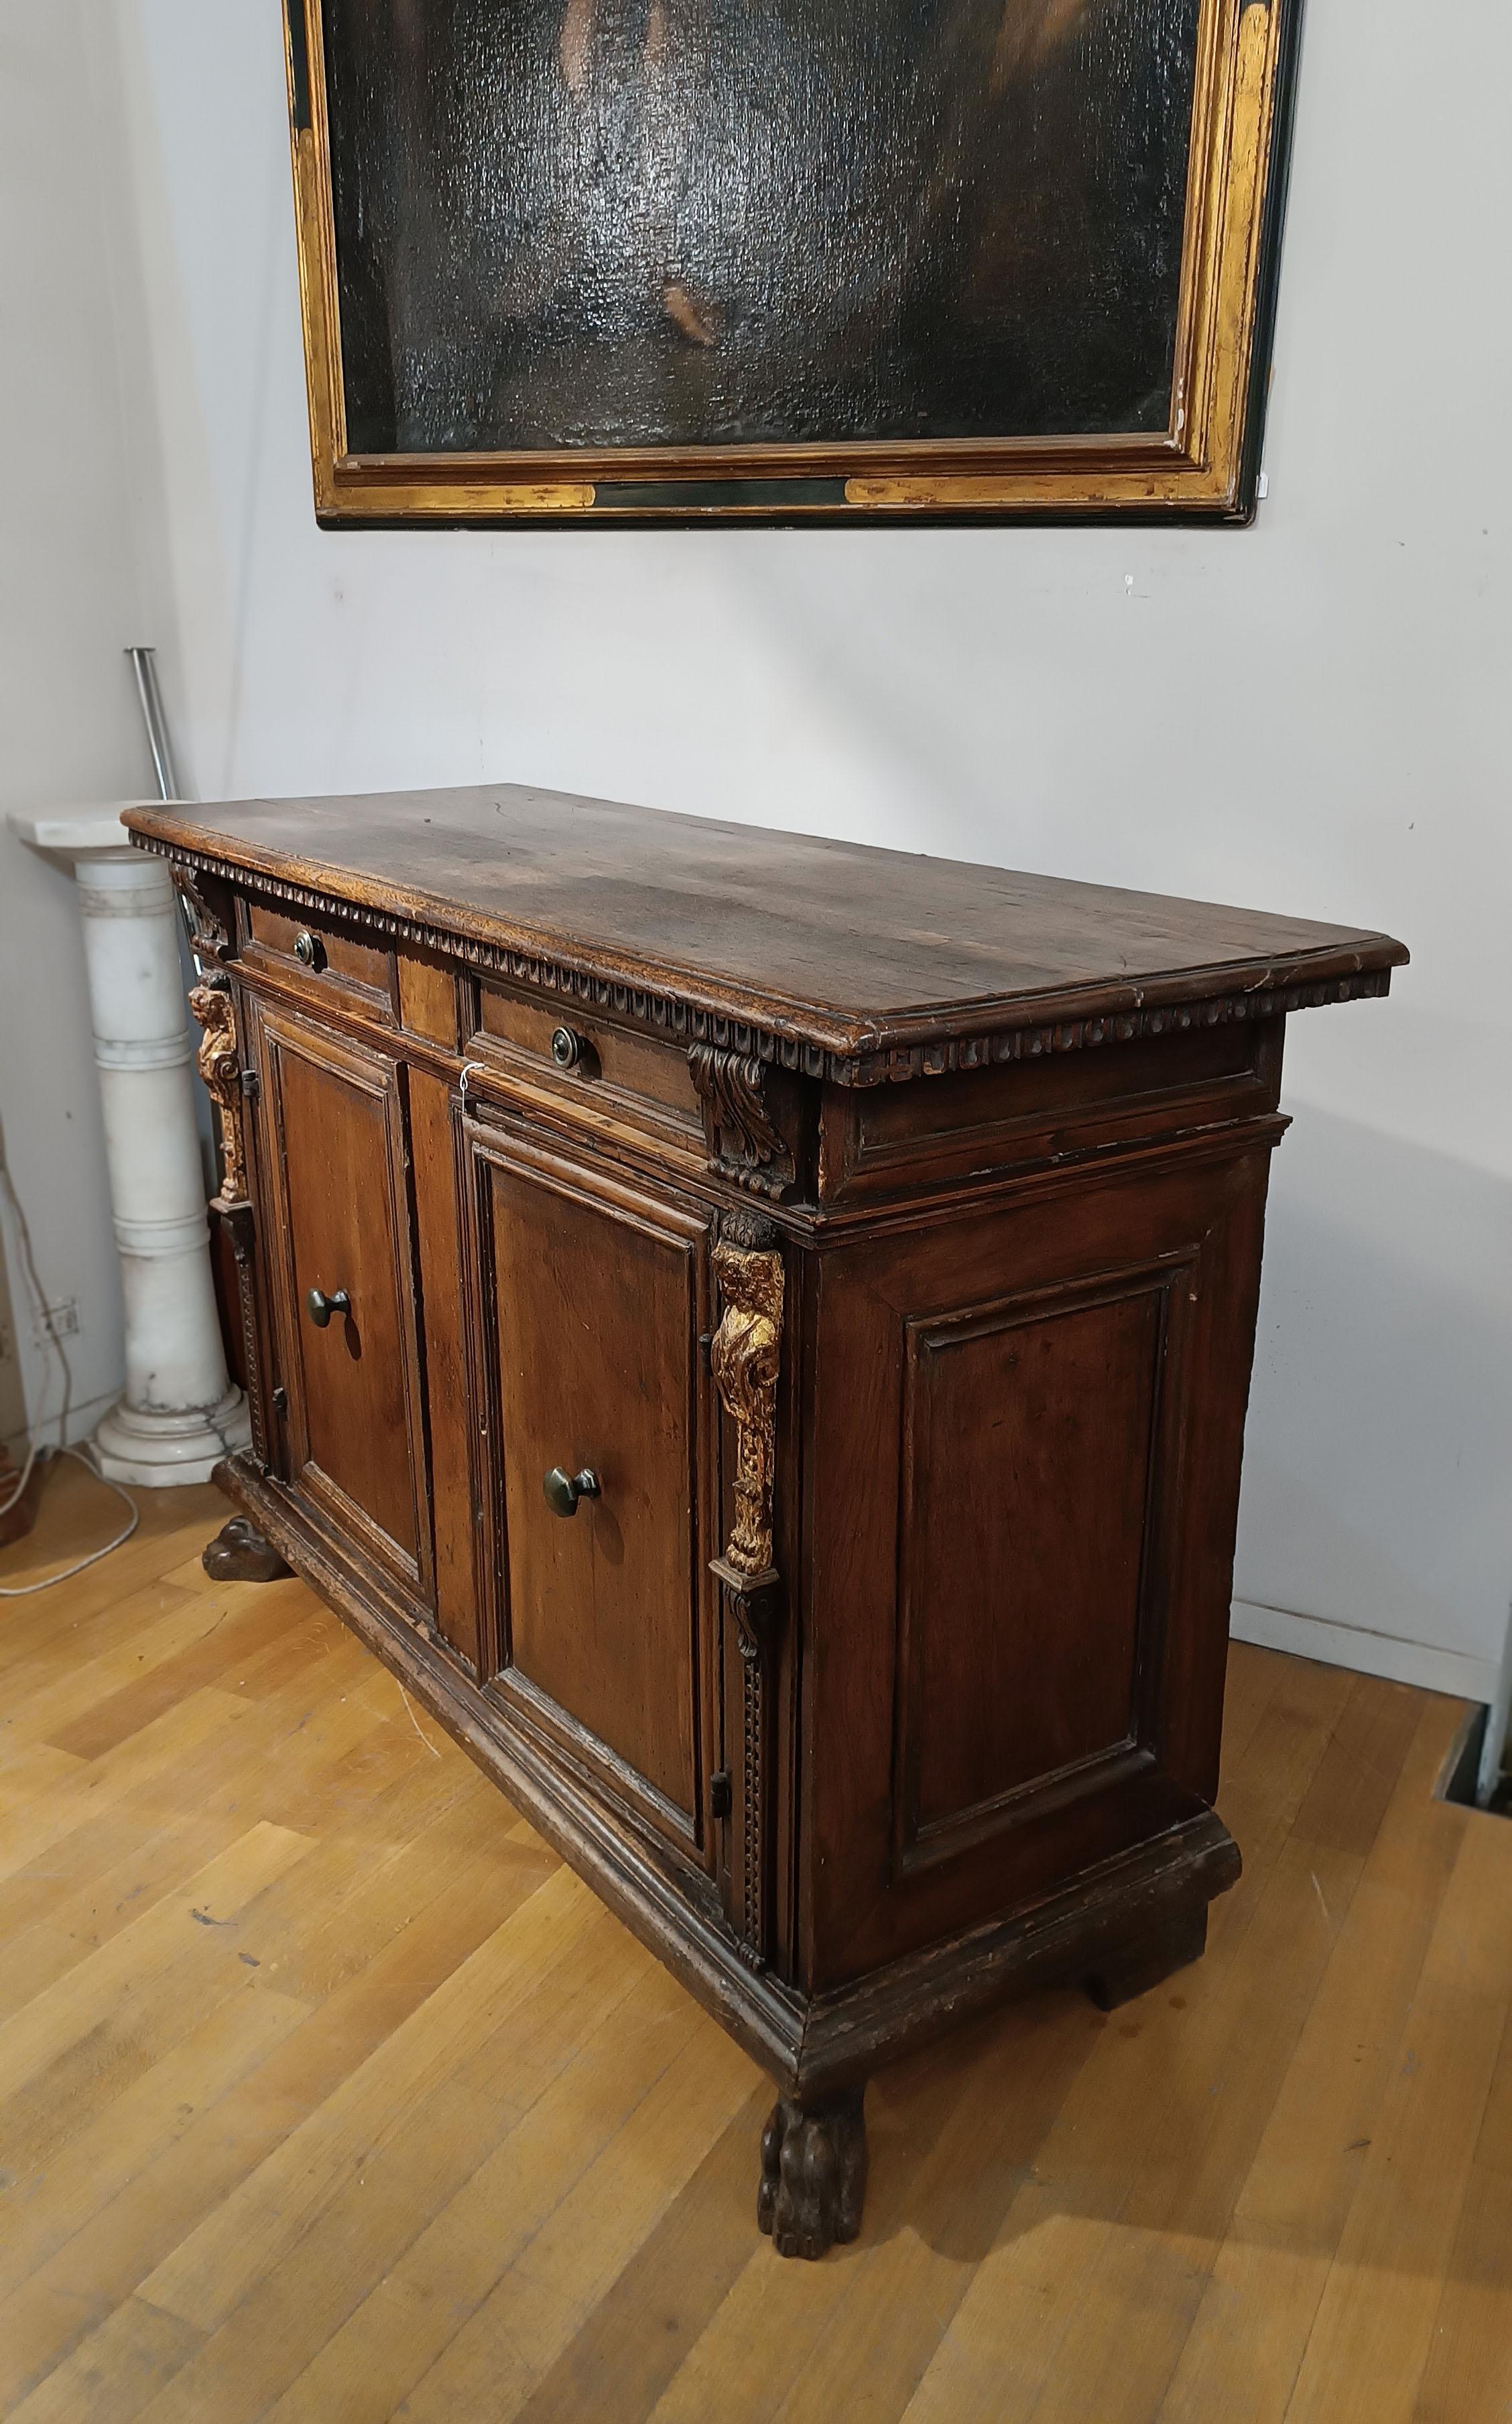 Splendid sideboard in solid walnut, finely carved with refined decorative details. The cabinet has two doors that open onto two large shelves, and two drawers on the front. The classical finishes include metope carvings under the top and capitals on